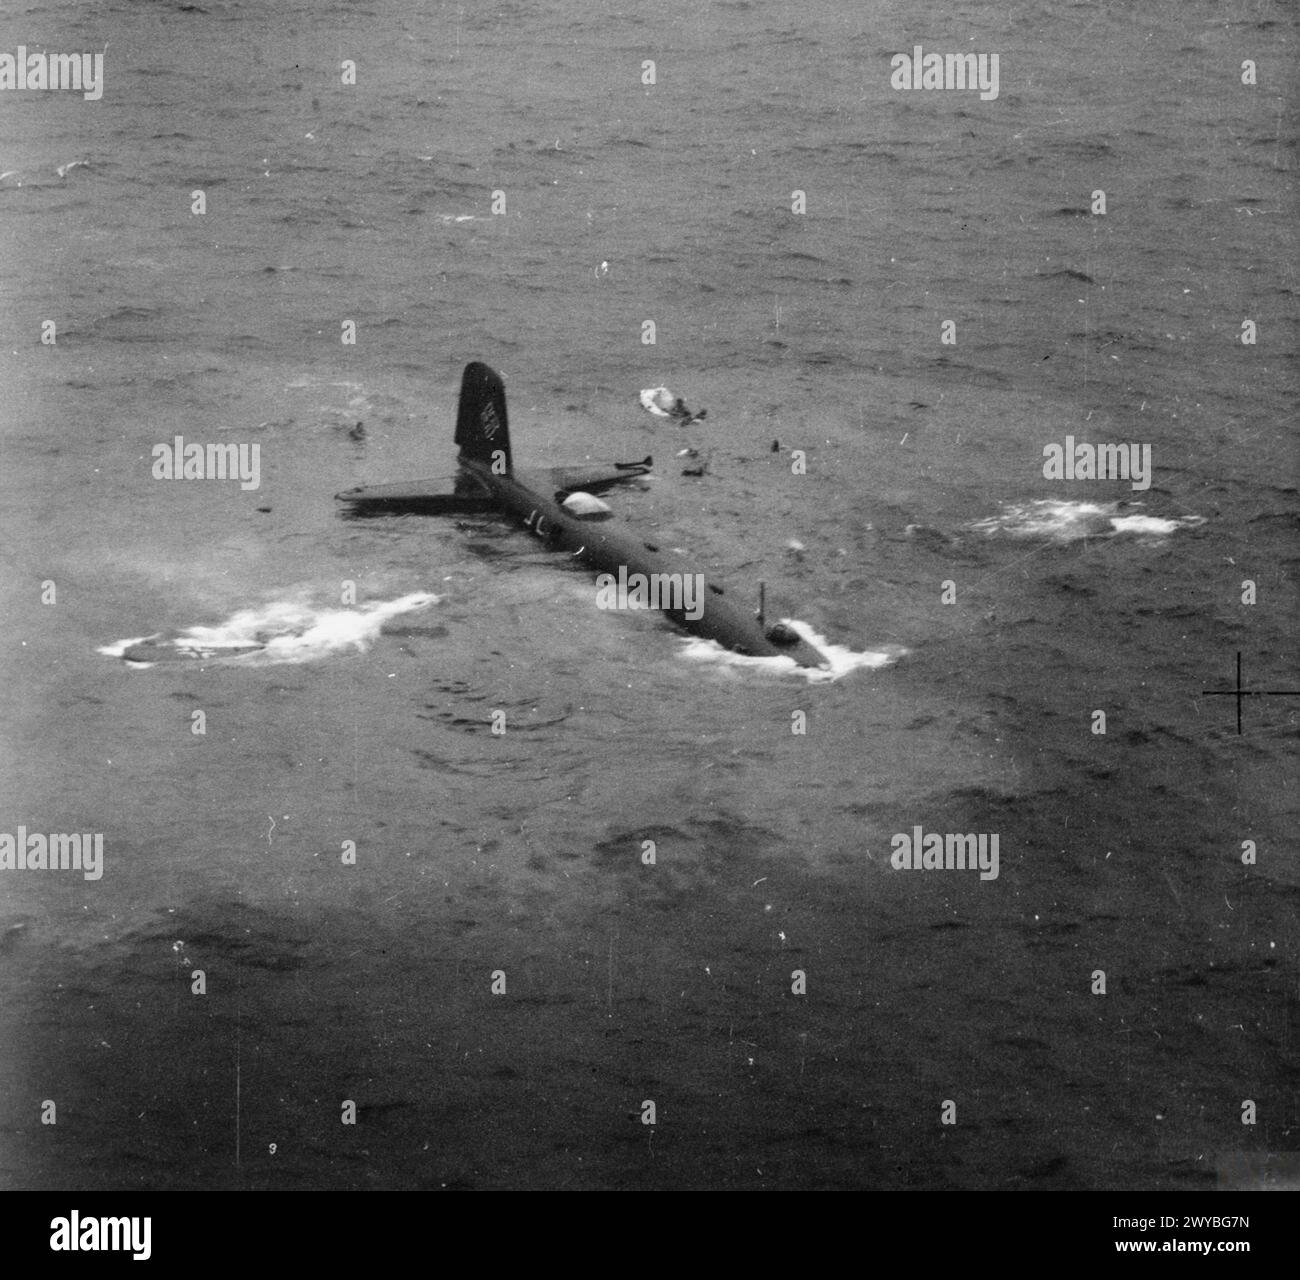 THE BATTLE OF ATLANTIC, 1939-1945 - A Focke-Wulf Fw 200 Kondor sinking in the Atlantic Ocean west of Ireland, after being shot down by a Lockheed Hudson Mark V of No. 233 Squadron RAF based at Aldergrove, County Antrim, while trying to attack a convoy, 23 July 1941.This oblique aerial photograph was taken from the victorious Hudson (AM536) and shows the crew of the Kondor swimming for their liferaft which is inflating to the right of the tailplane. , Royal Air Force, Maintenance Unit, 235, German Air Force (Third Reich) Stock Photo